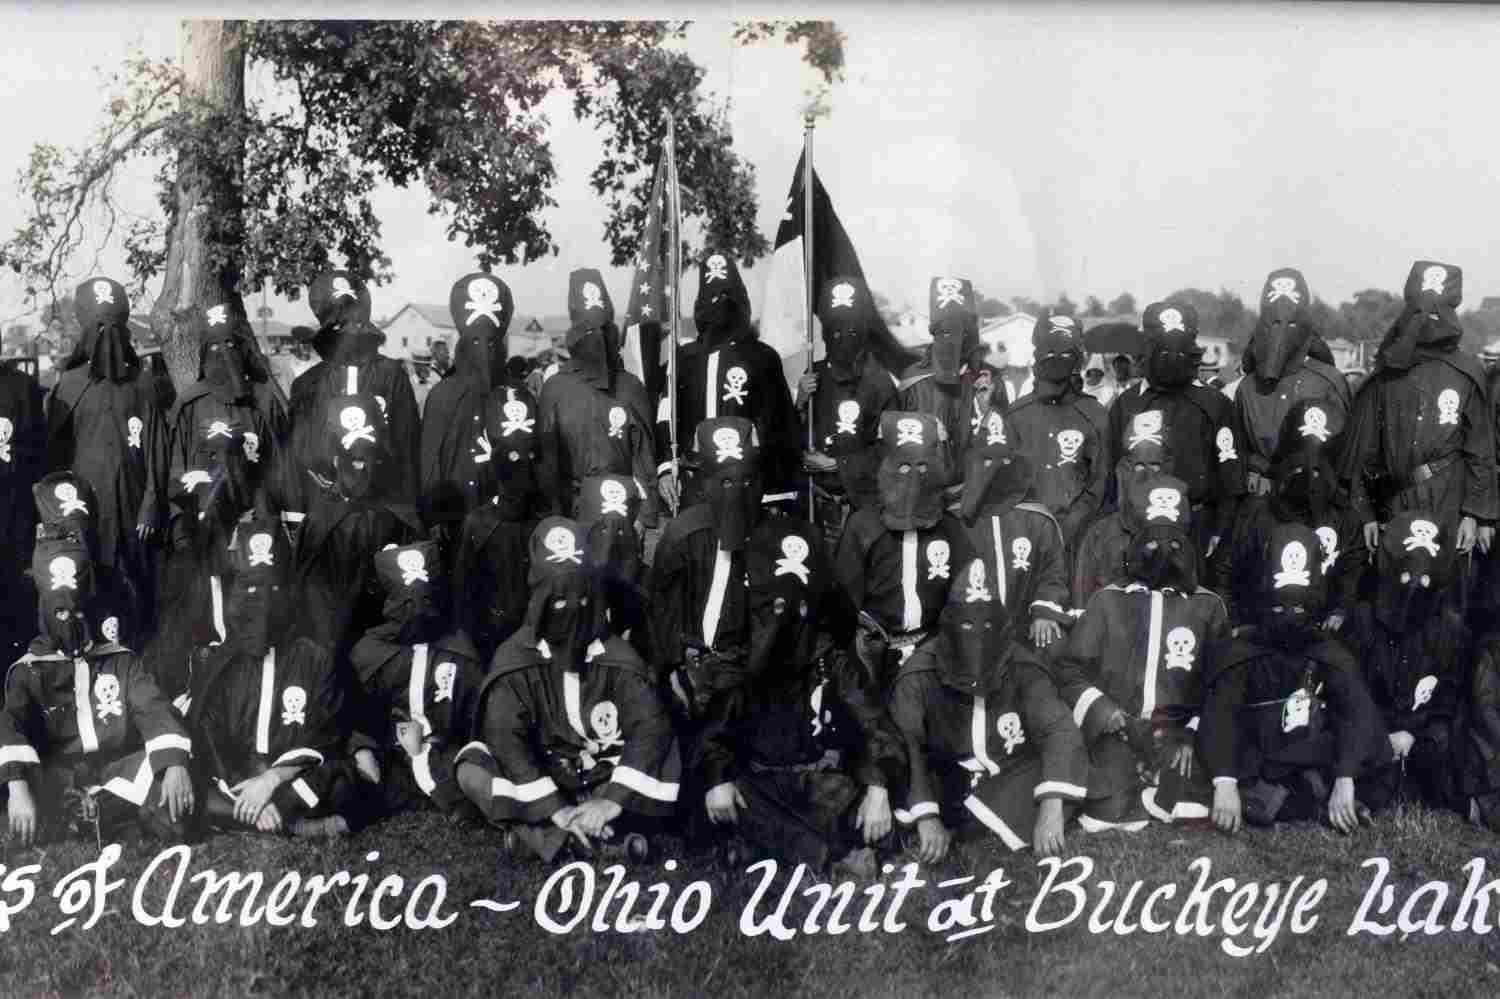 1920S ARMED KNIGHT RIDERS OF AMERICA PHOTO 2ND GEN